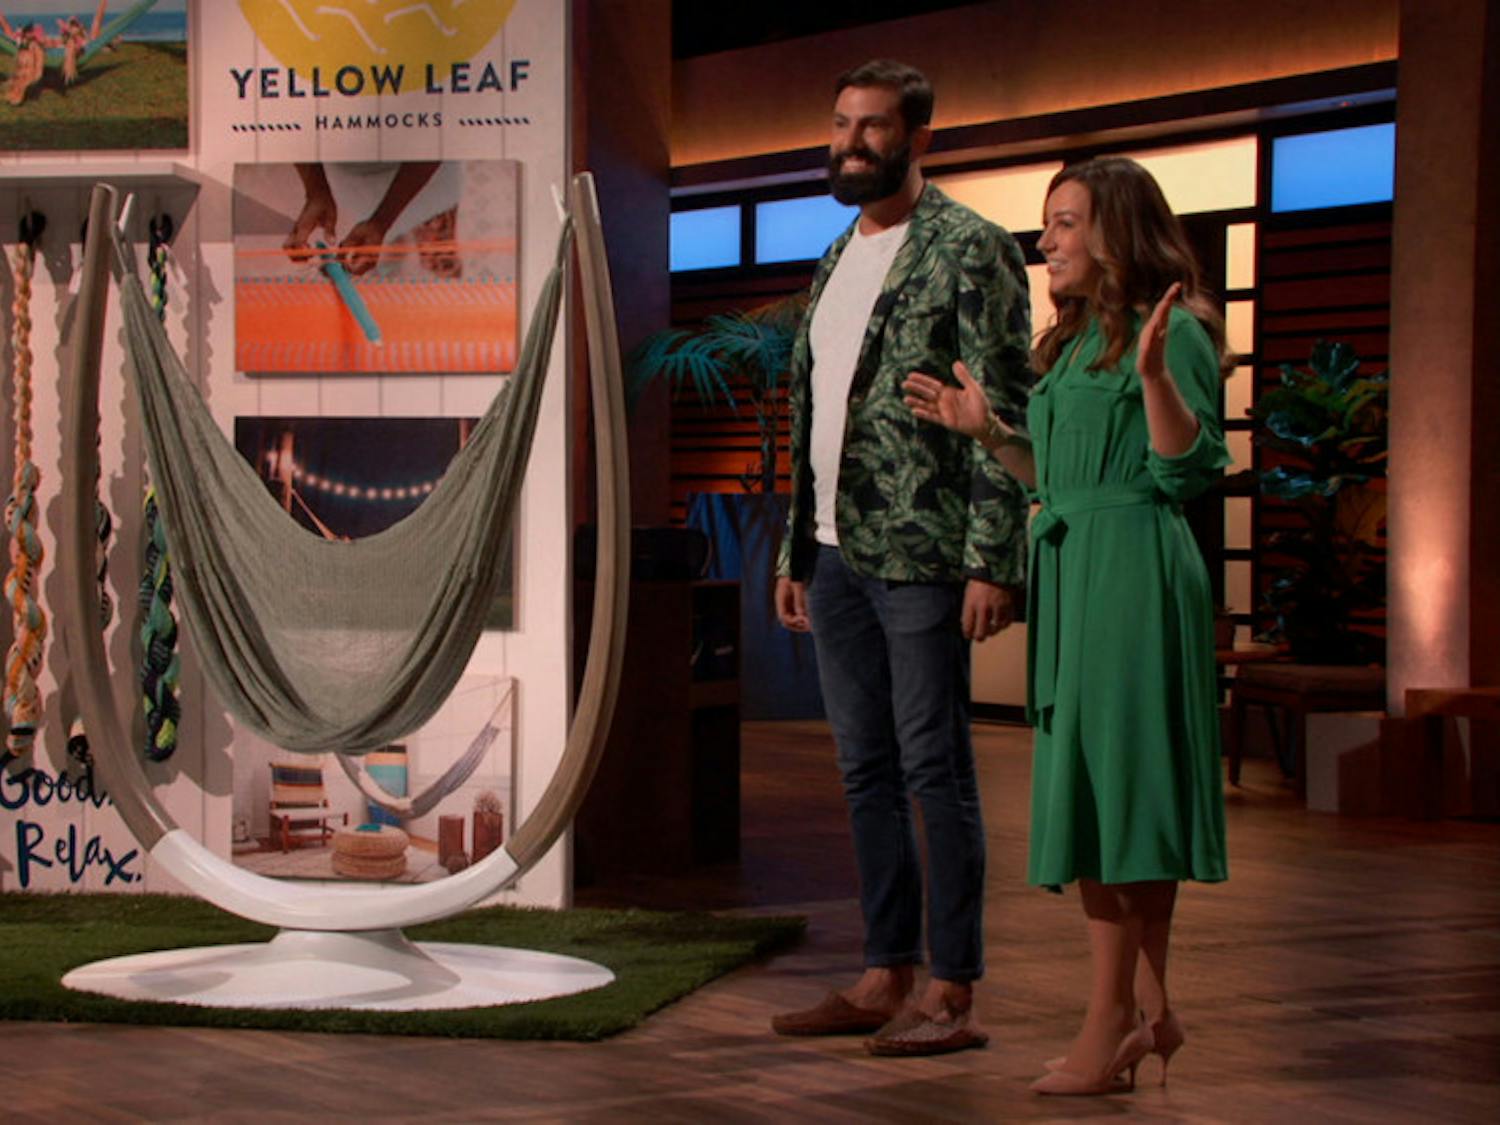 UF alumna Rachel Connors made a $1 million deal on “Shark Tank” for Yellow Leaf Hammocks, a company dedicated to helping women weavers in rural Thailand.
&nbsp;